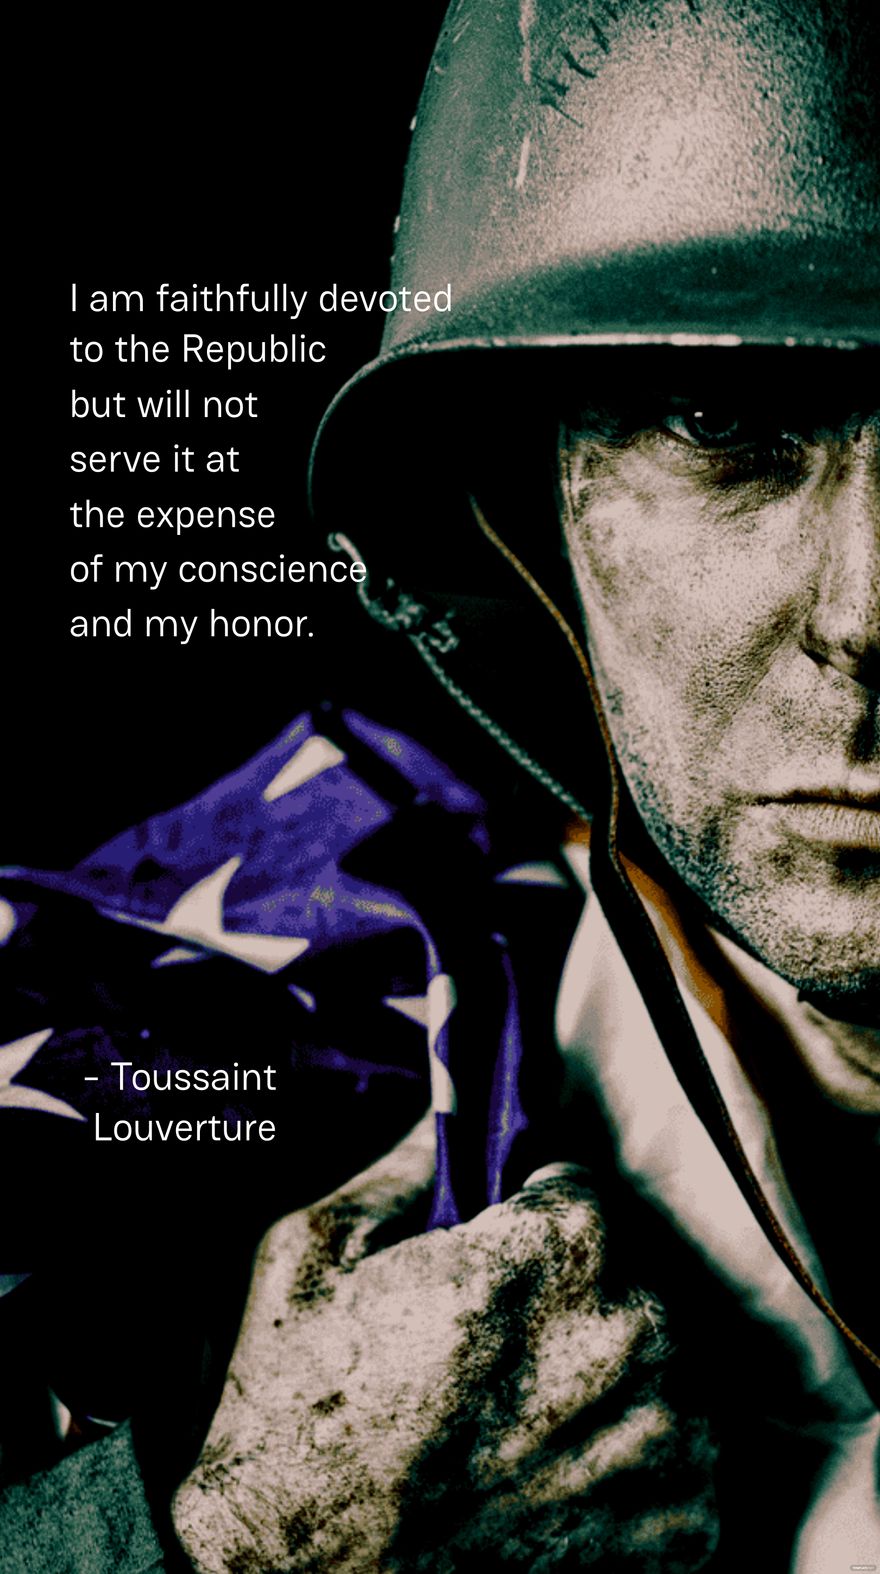 I am faithfully devoted to the Republic but will not serve it at the expense of my conscience and my honor. - Toussaint Louverture